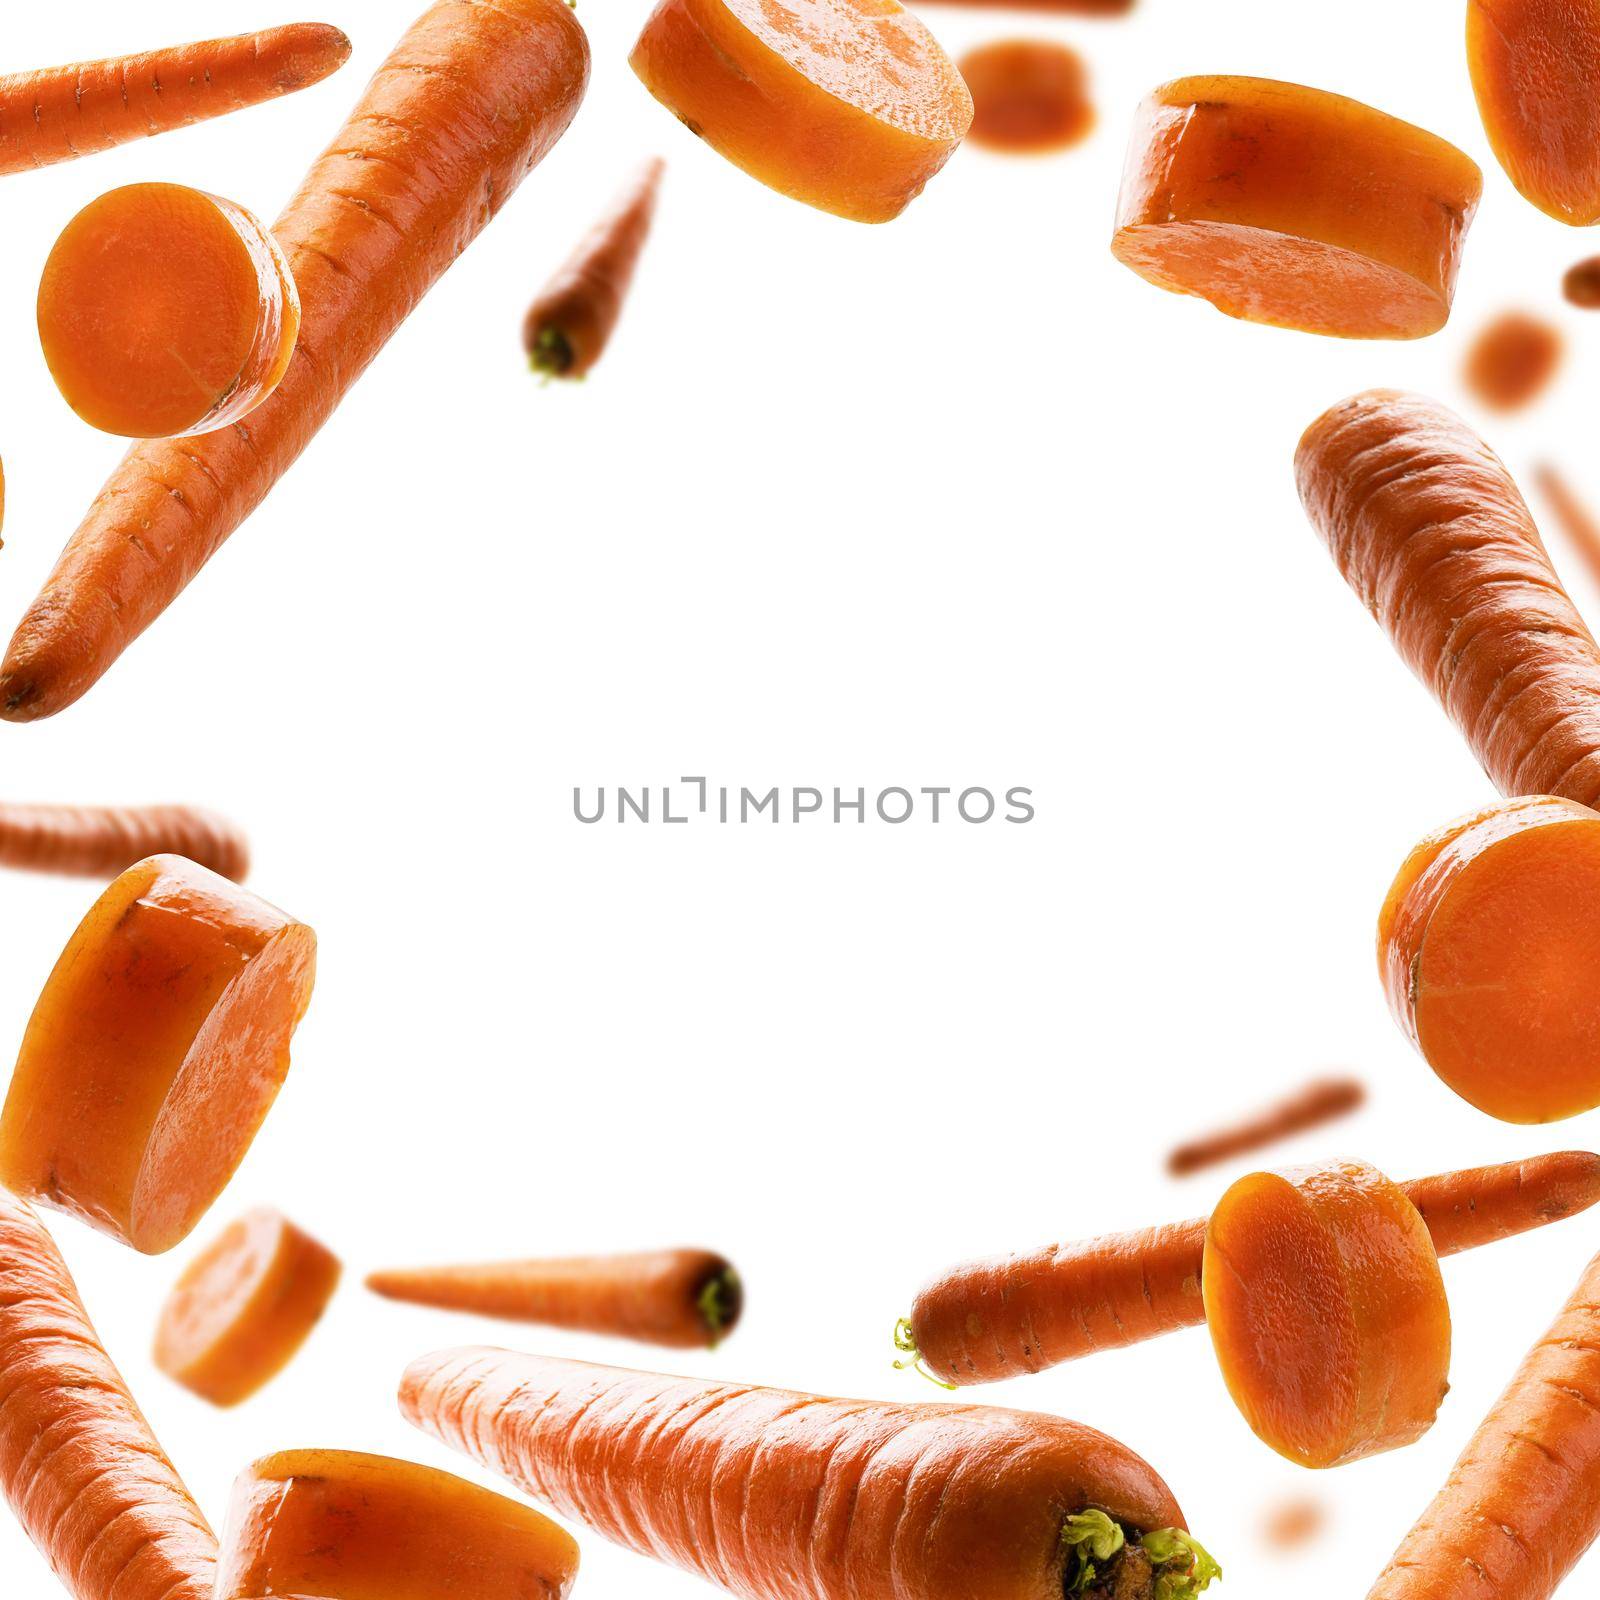 Ripe carrots whole and sliced levitate on a white background by butenkow